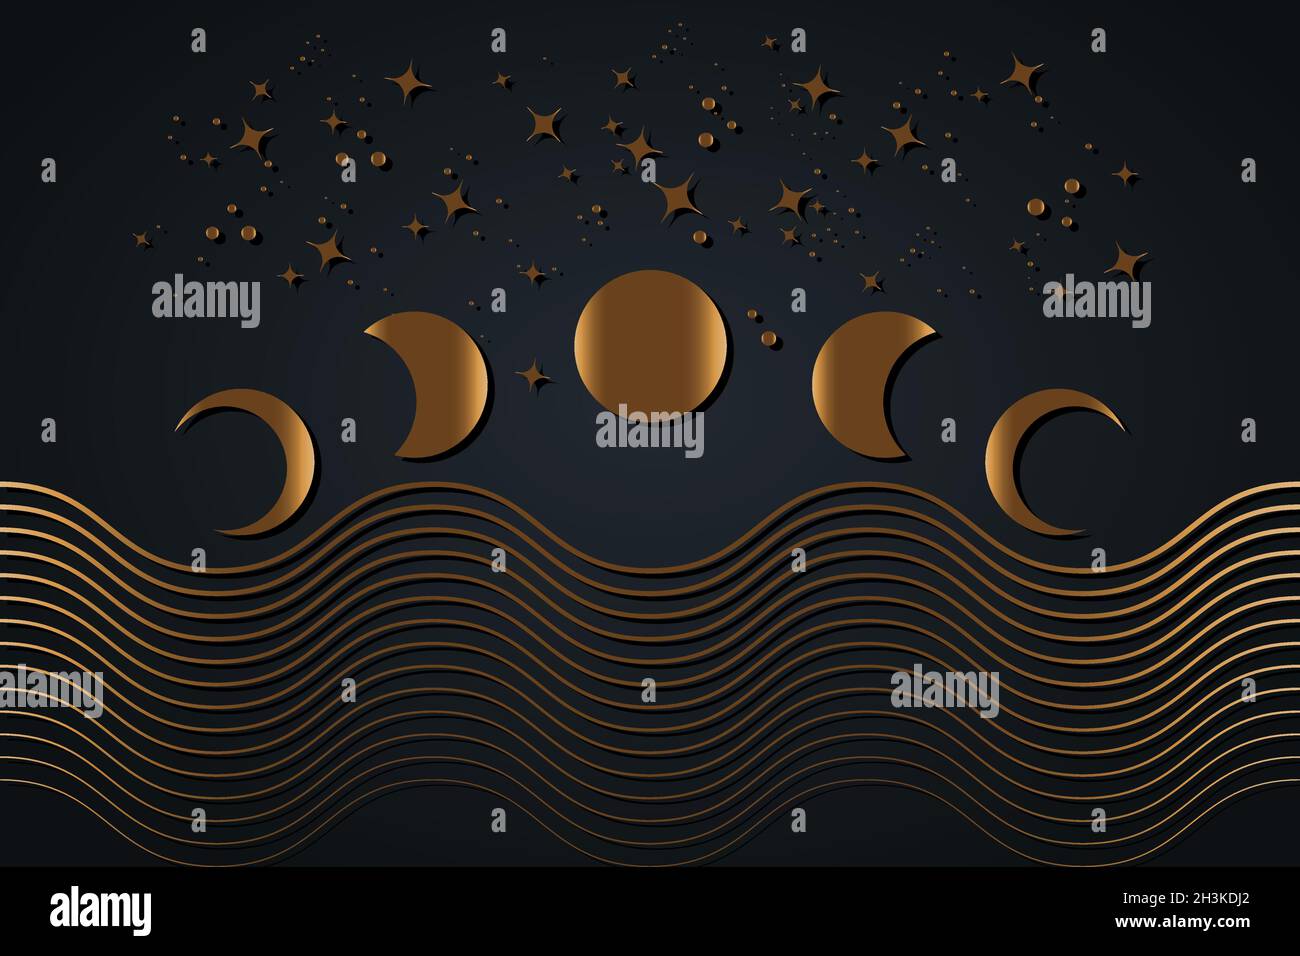 Computer Backgrounds Moon Phases moon phases computer HD wallpaper  Pxfuel